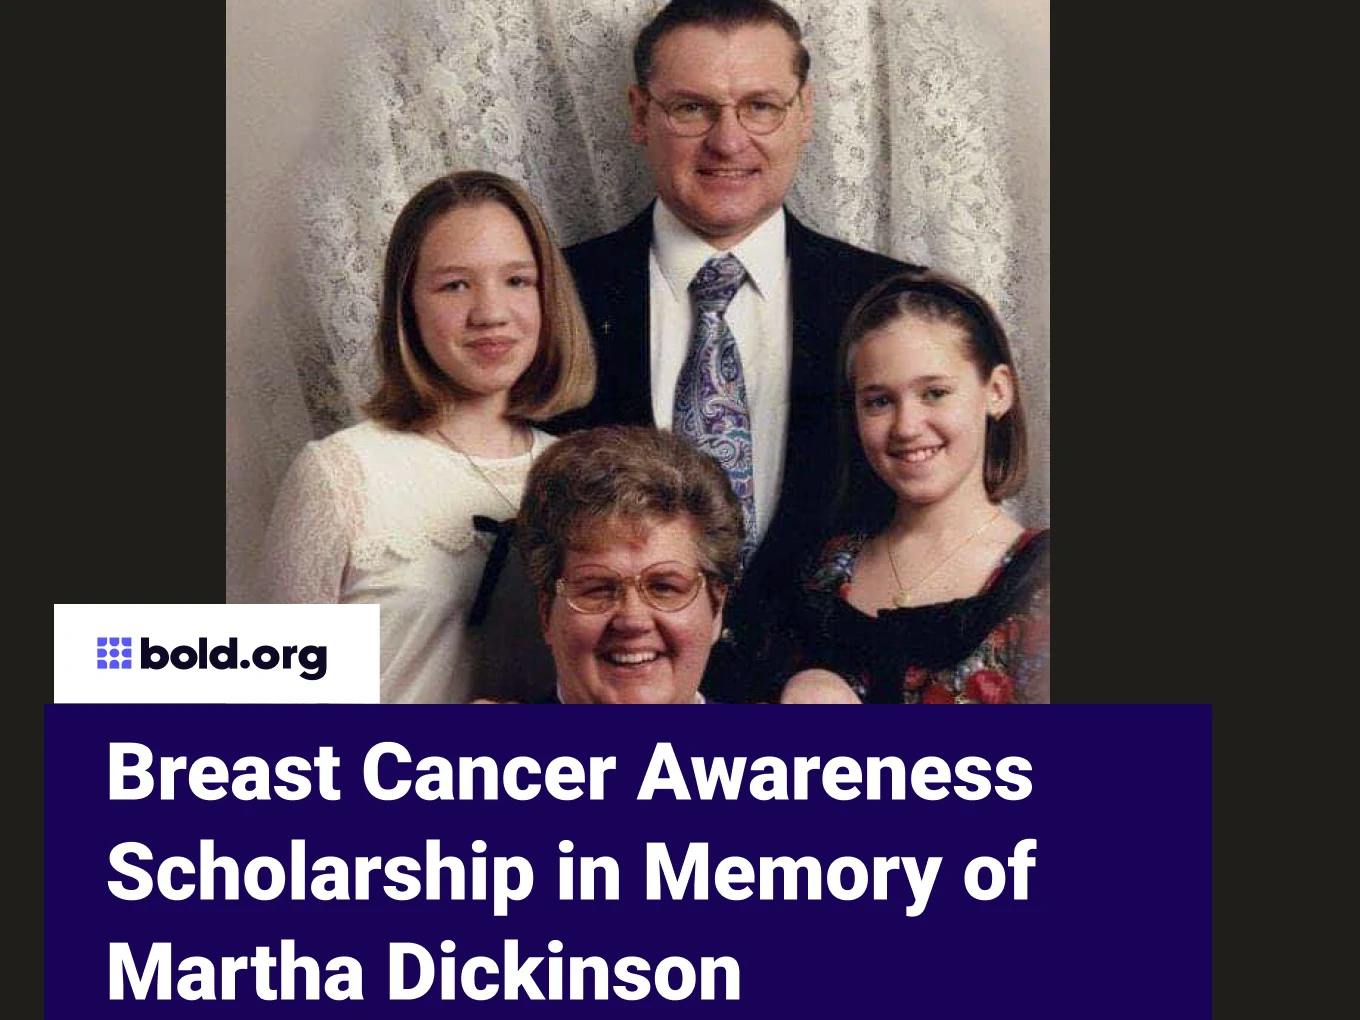 Breast Cancer Awareness Scholarship in Memory of Martha Dickinson